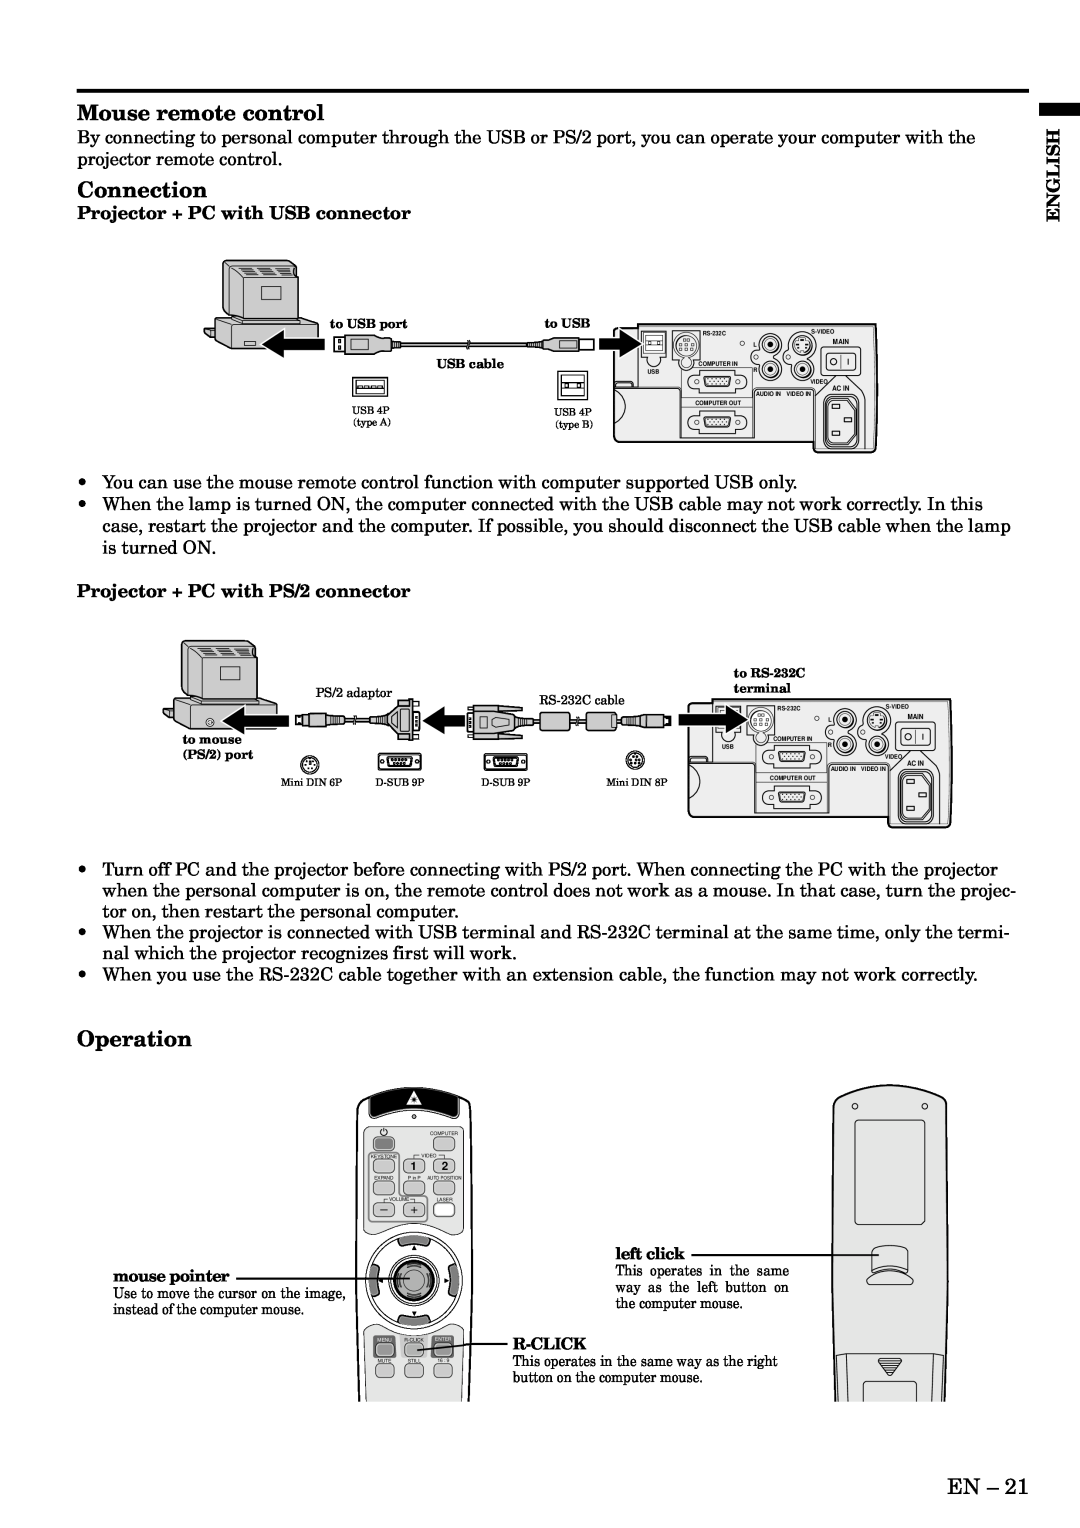 Mitsubishi Electronics XL2U user manual Mouse remote control, Connection, Operation, mouse pointer, left click, R-Click 